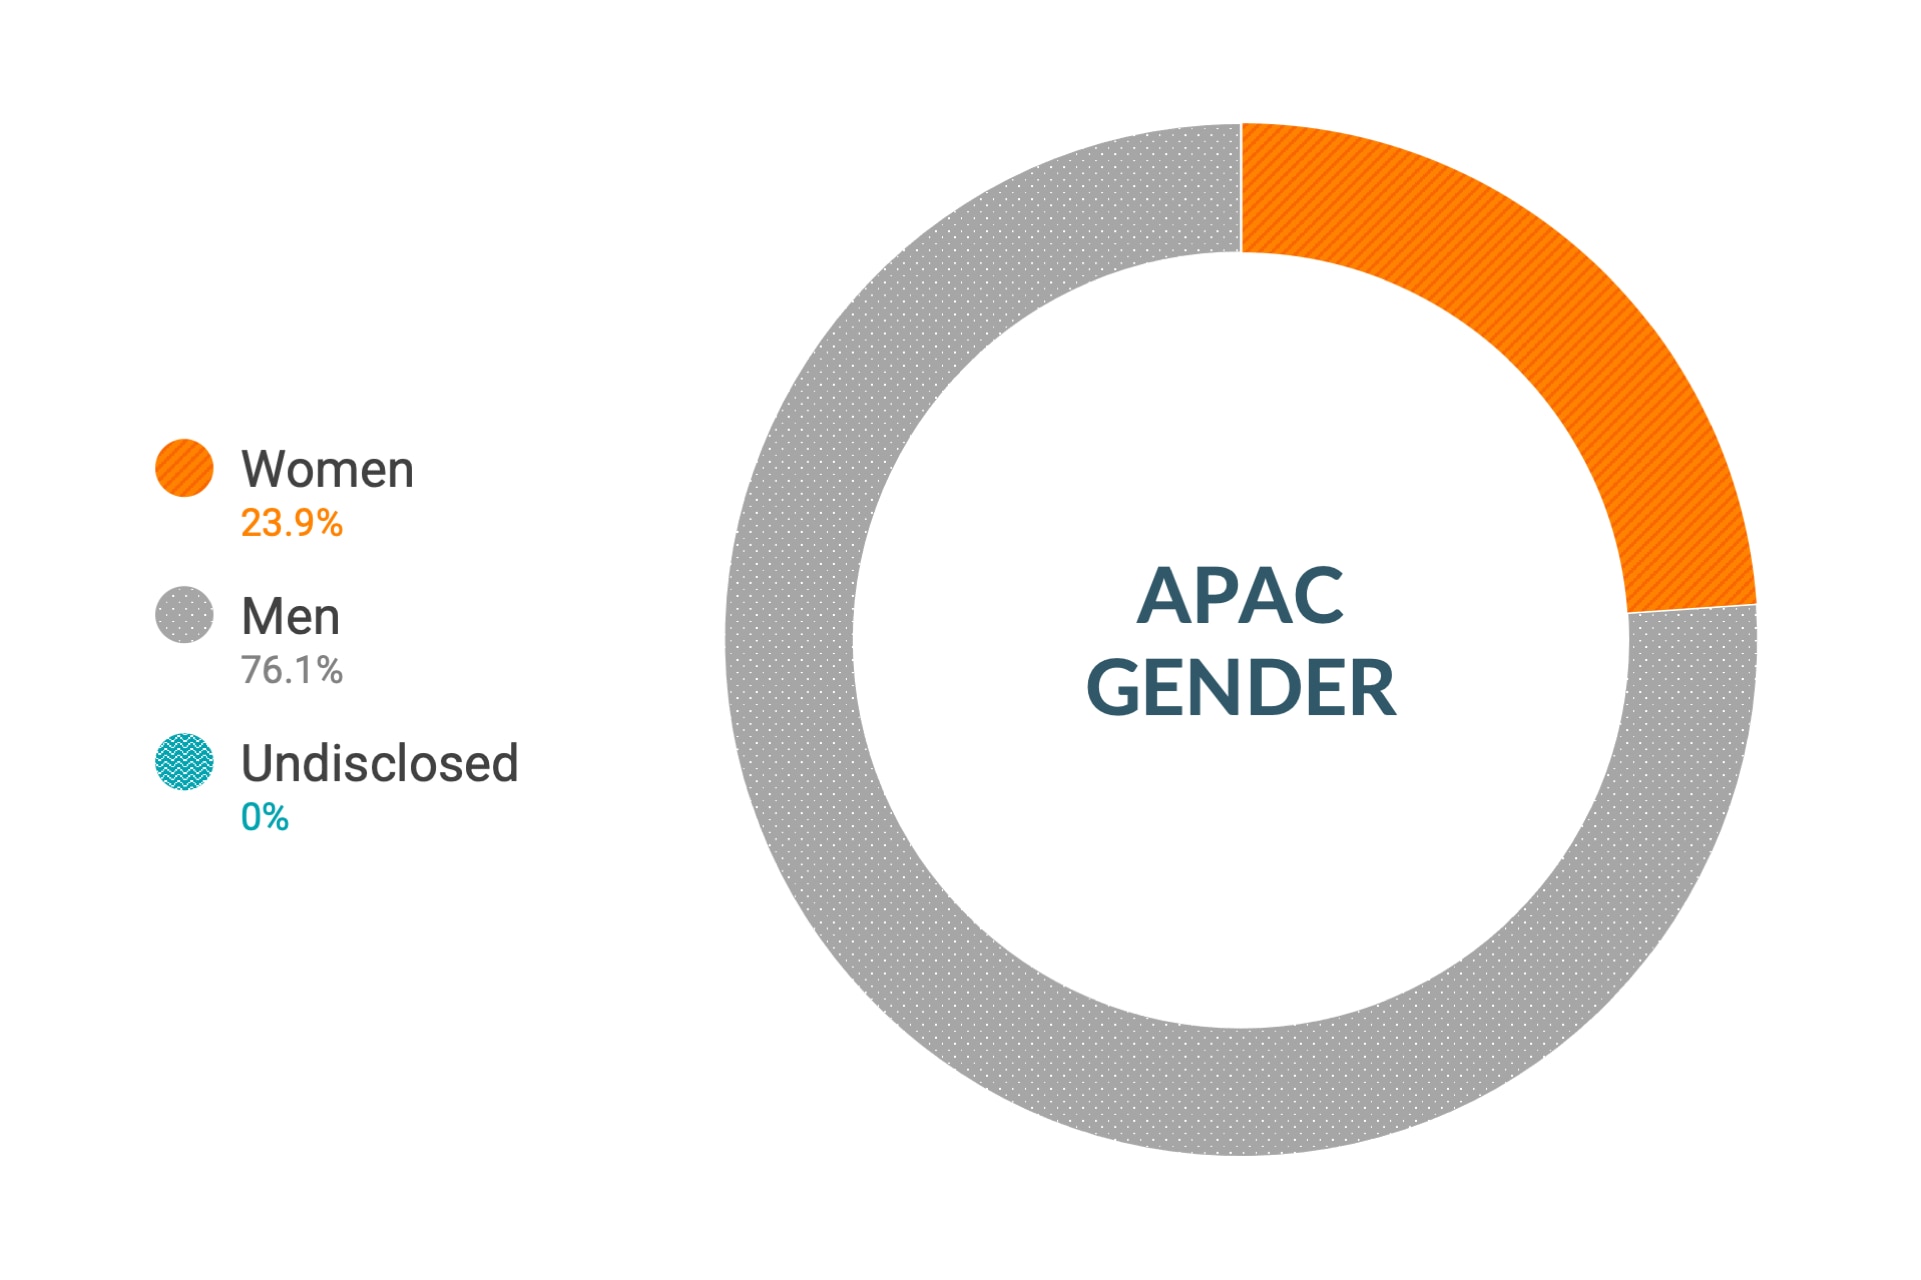 Cloudera Diversity and Inclusion data for APAC Gender: Women 23.9%, Men 76.1%, Undisclosed 0.0%